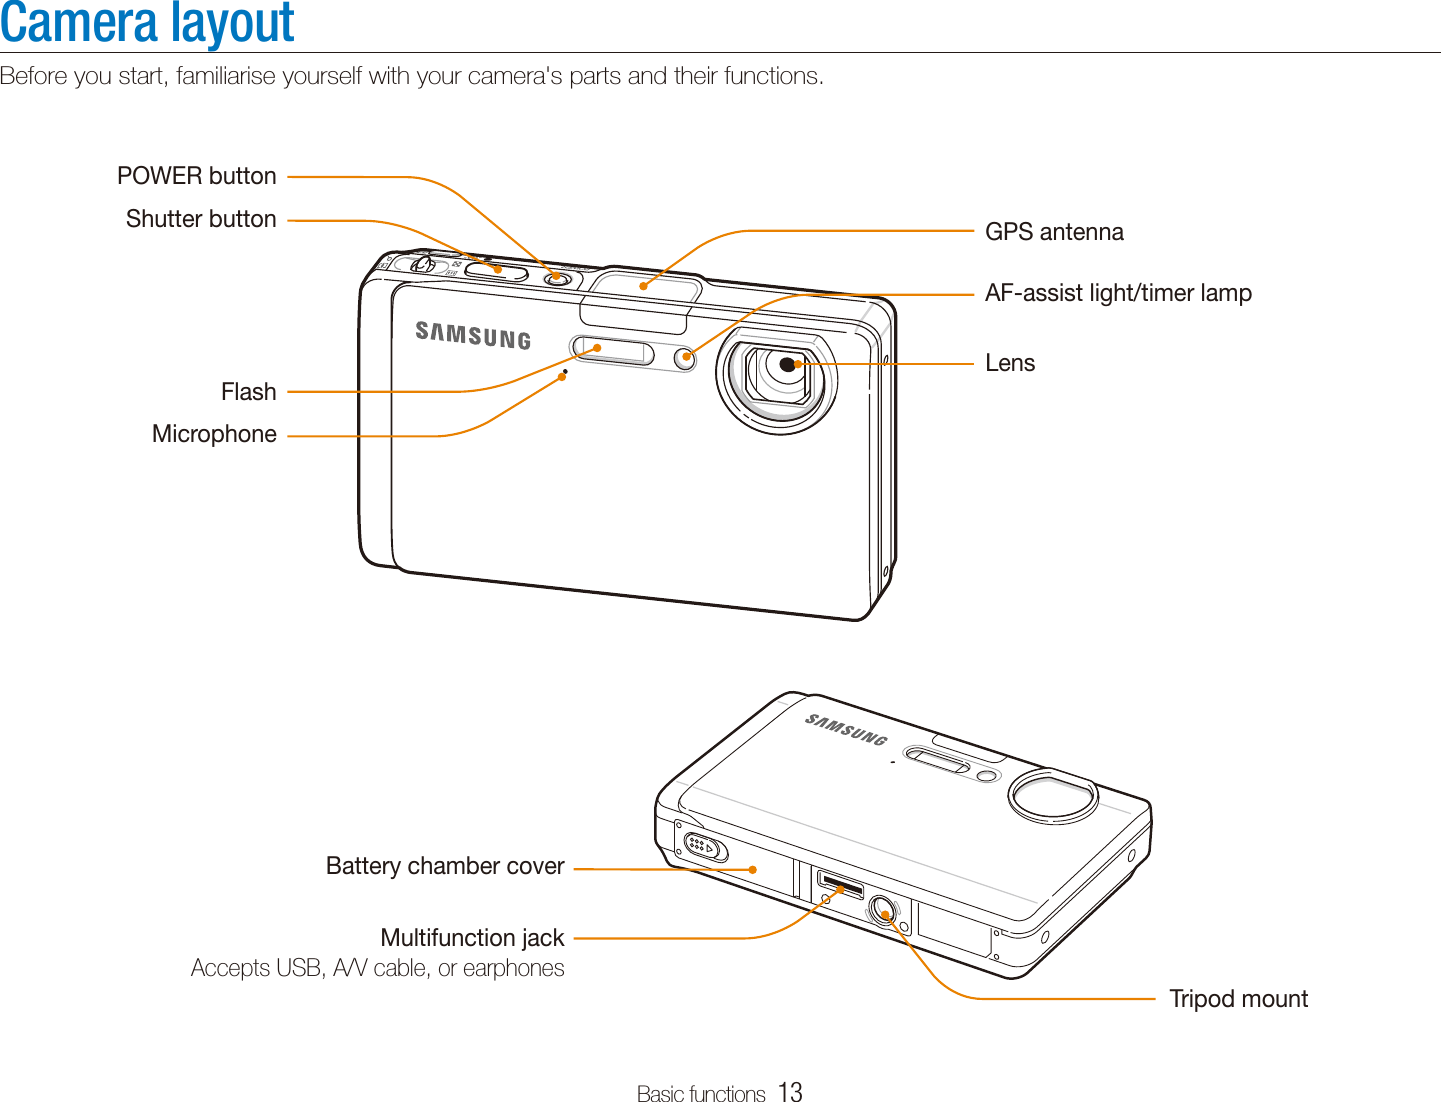 Basic functions  13Camera layoutBefore you start, familiarise yourself with your camera&apos;s parts and their functions.Shutter buttonPOWER buttonLensFlashAF-assist light/timer lampMicrophoneGPS antennaMultifunction jackAccepts USB, A/V cable, or earphonesTripod mountBattery chamber cover